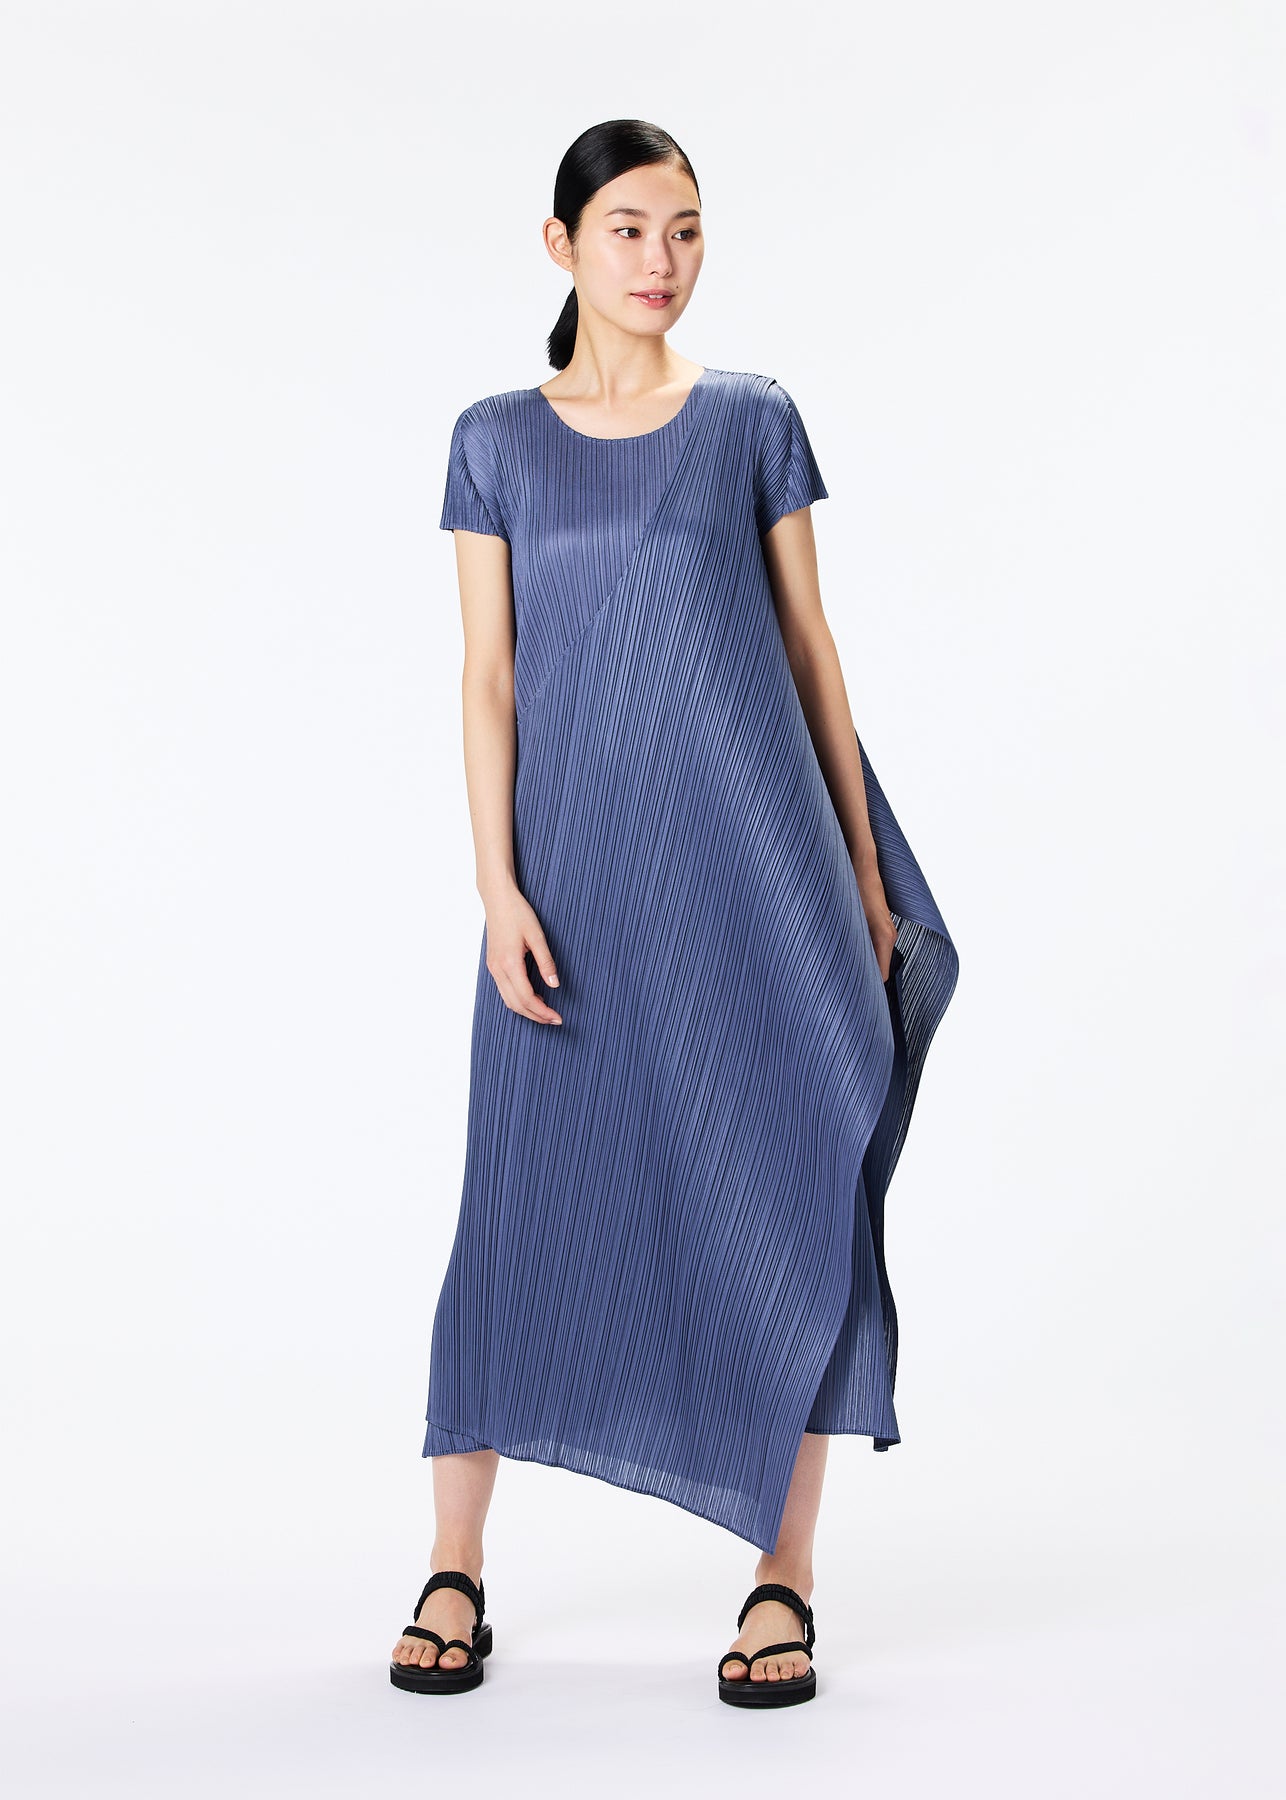 Pleats Please Issey Miyake Monthly Colors June Shirt Blue / 4